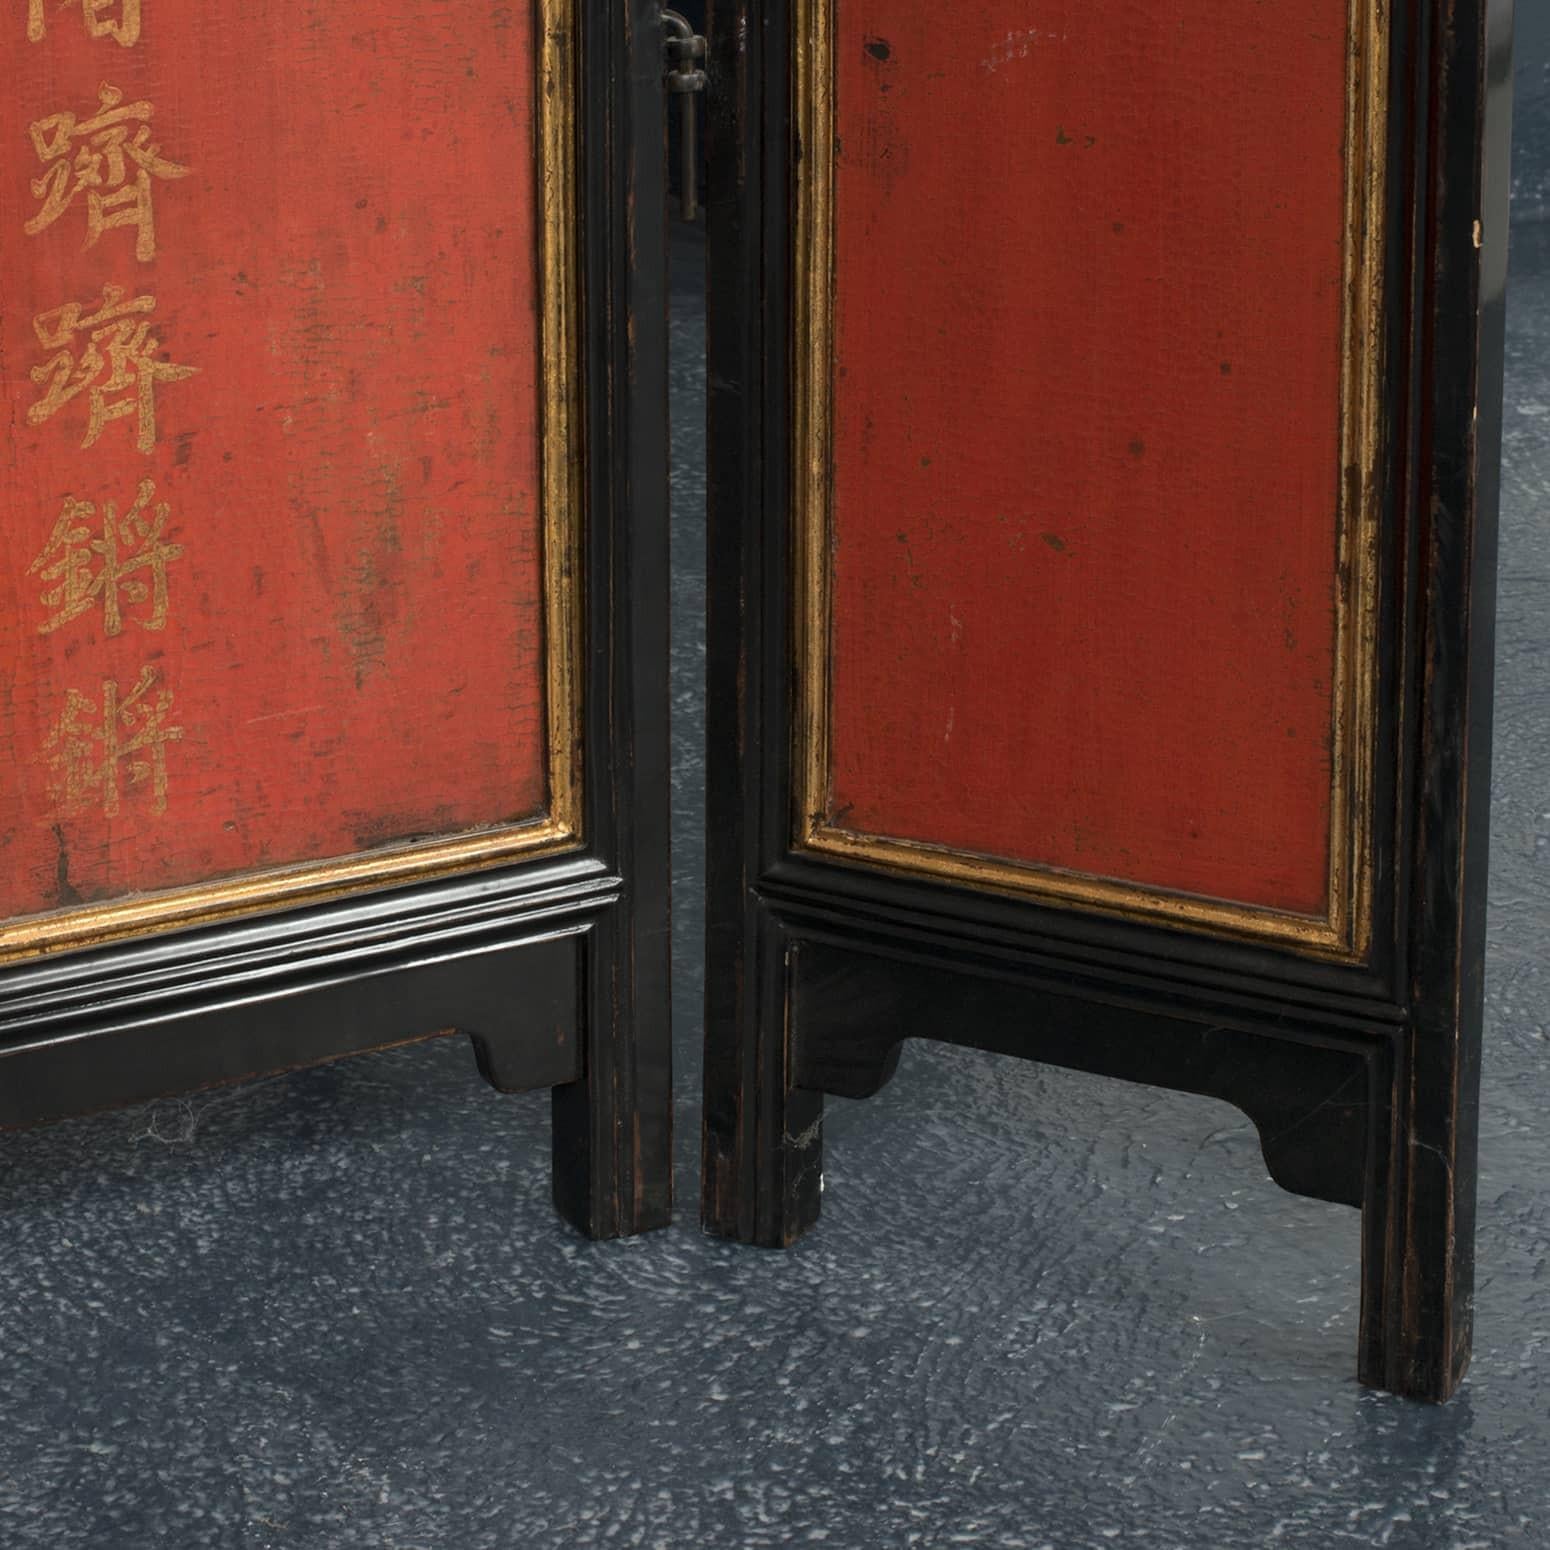 10 Lacquer Calligraphy Panels, Later Mounted as a Screen, Late 18th Century For Sale 2